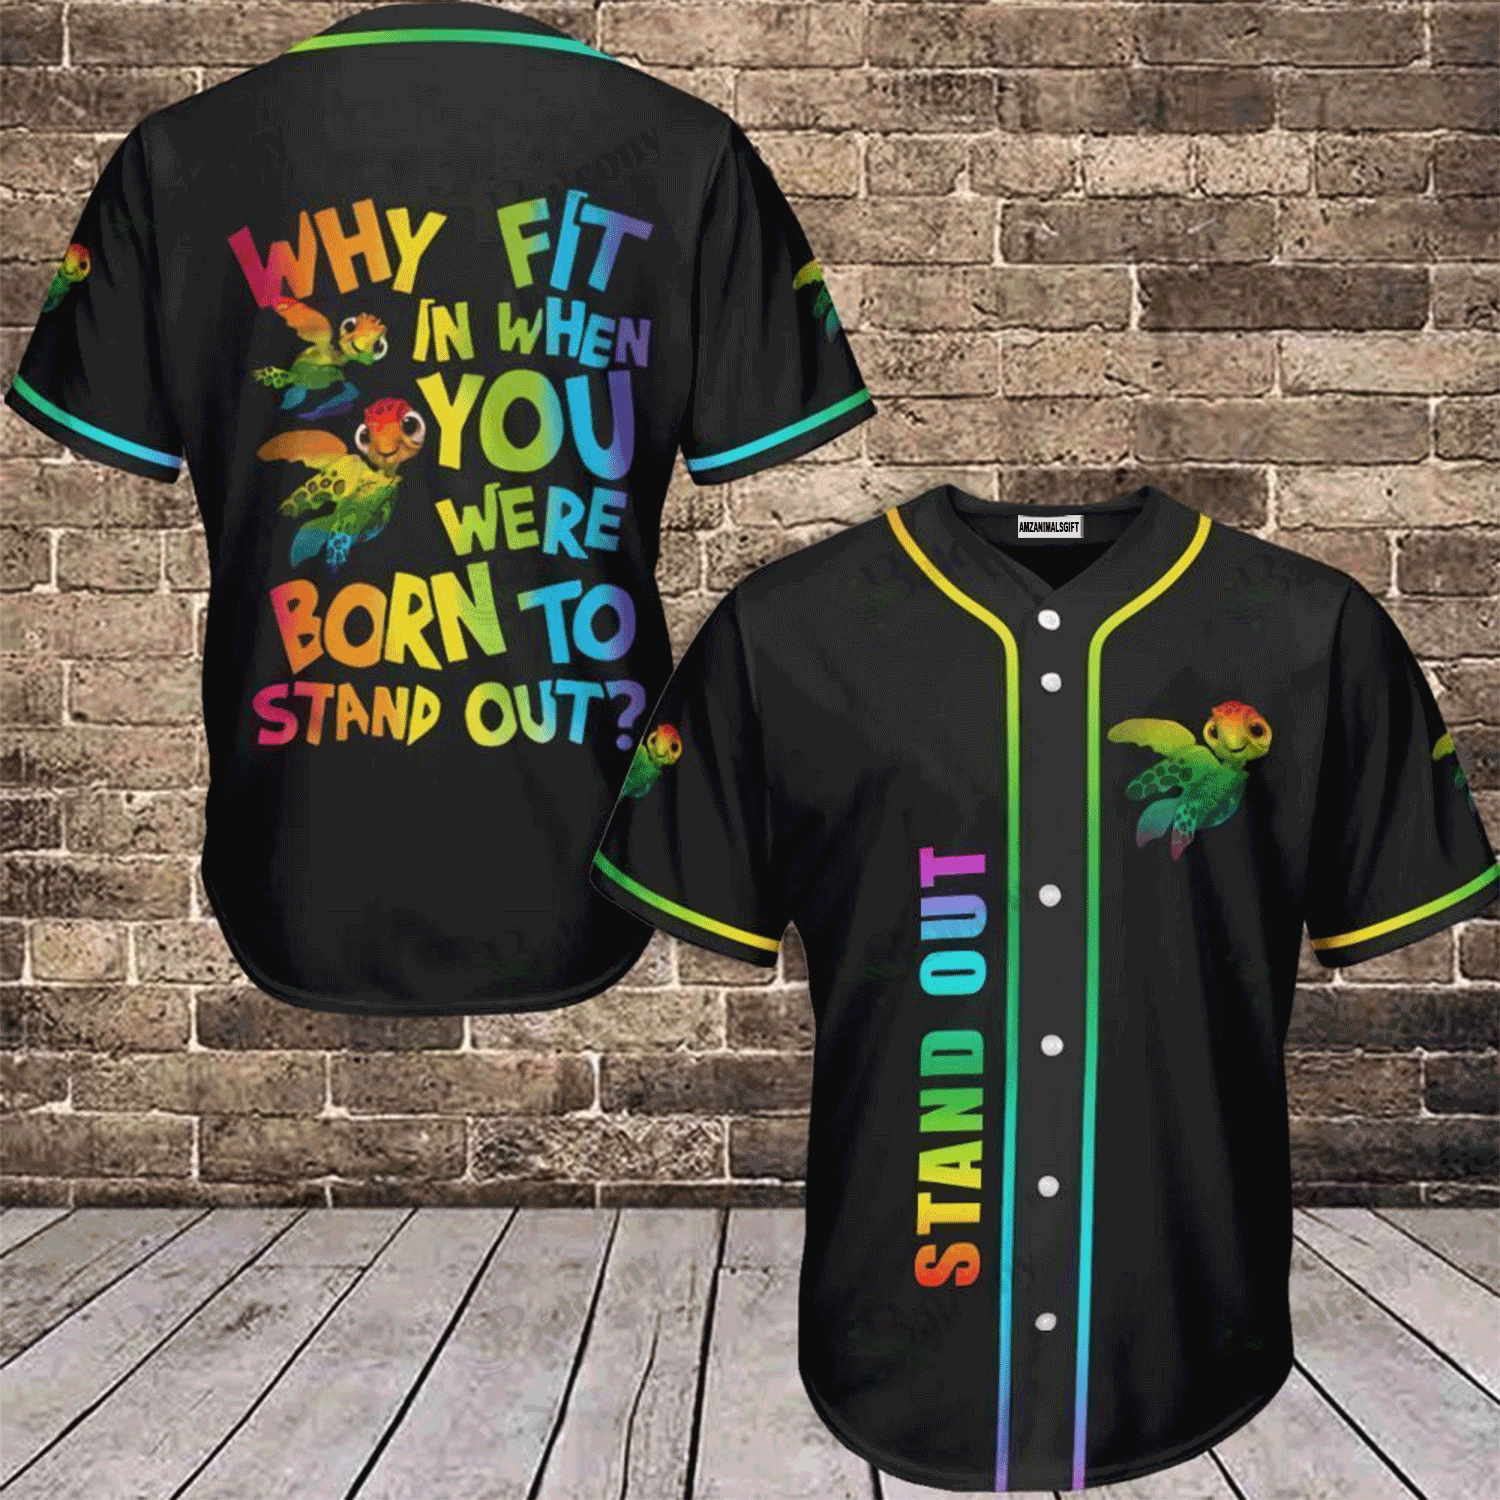 LGBT Baseball Jersey Shirt - Why Fit In When You Were Born To Stand Out Baseball Jersey Shirt For Men & Women, Perfect Gift For LGBT